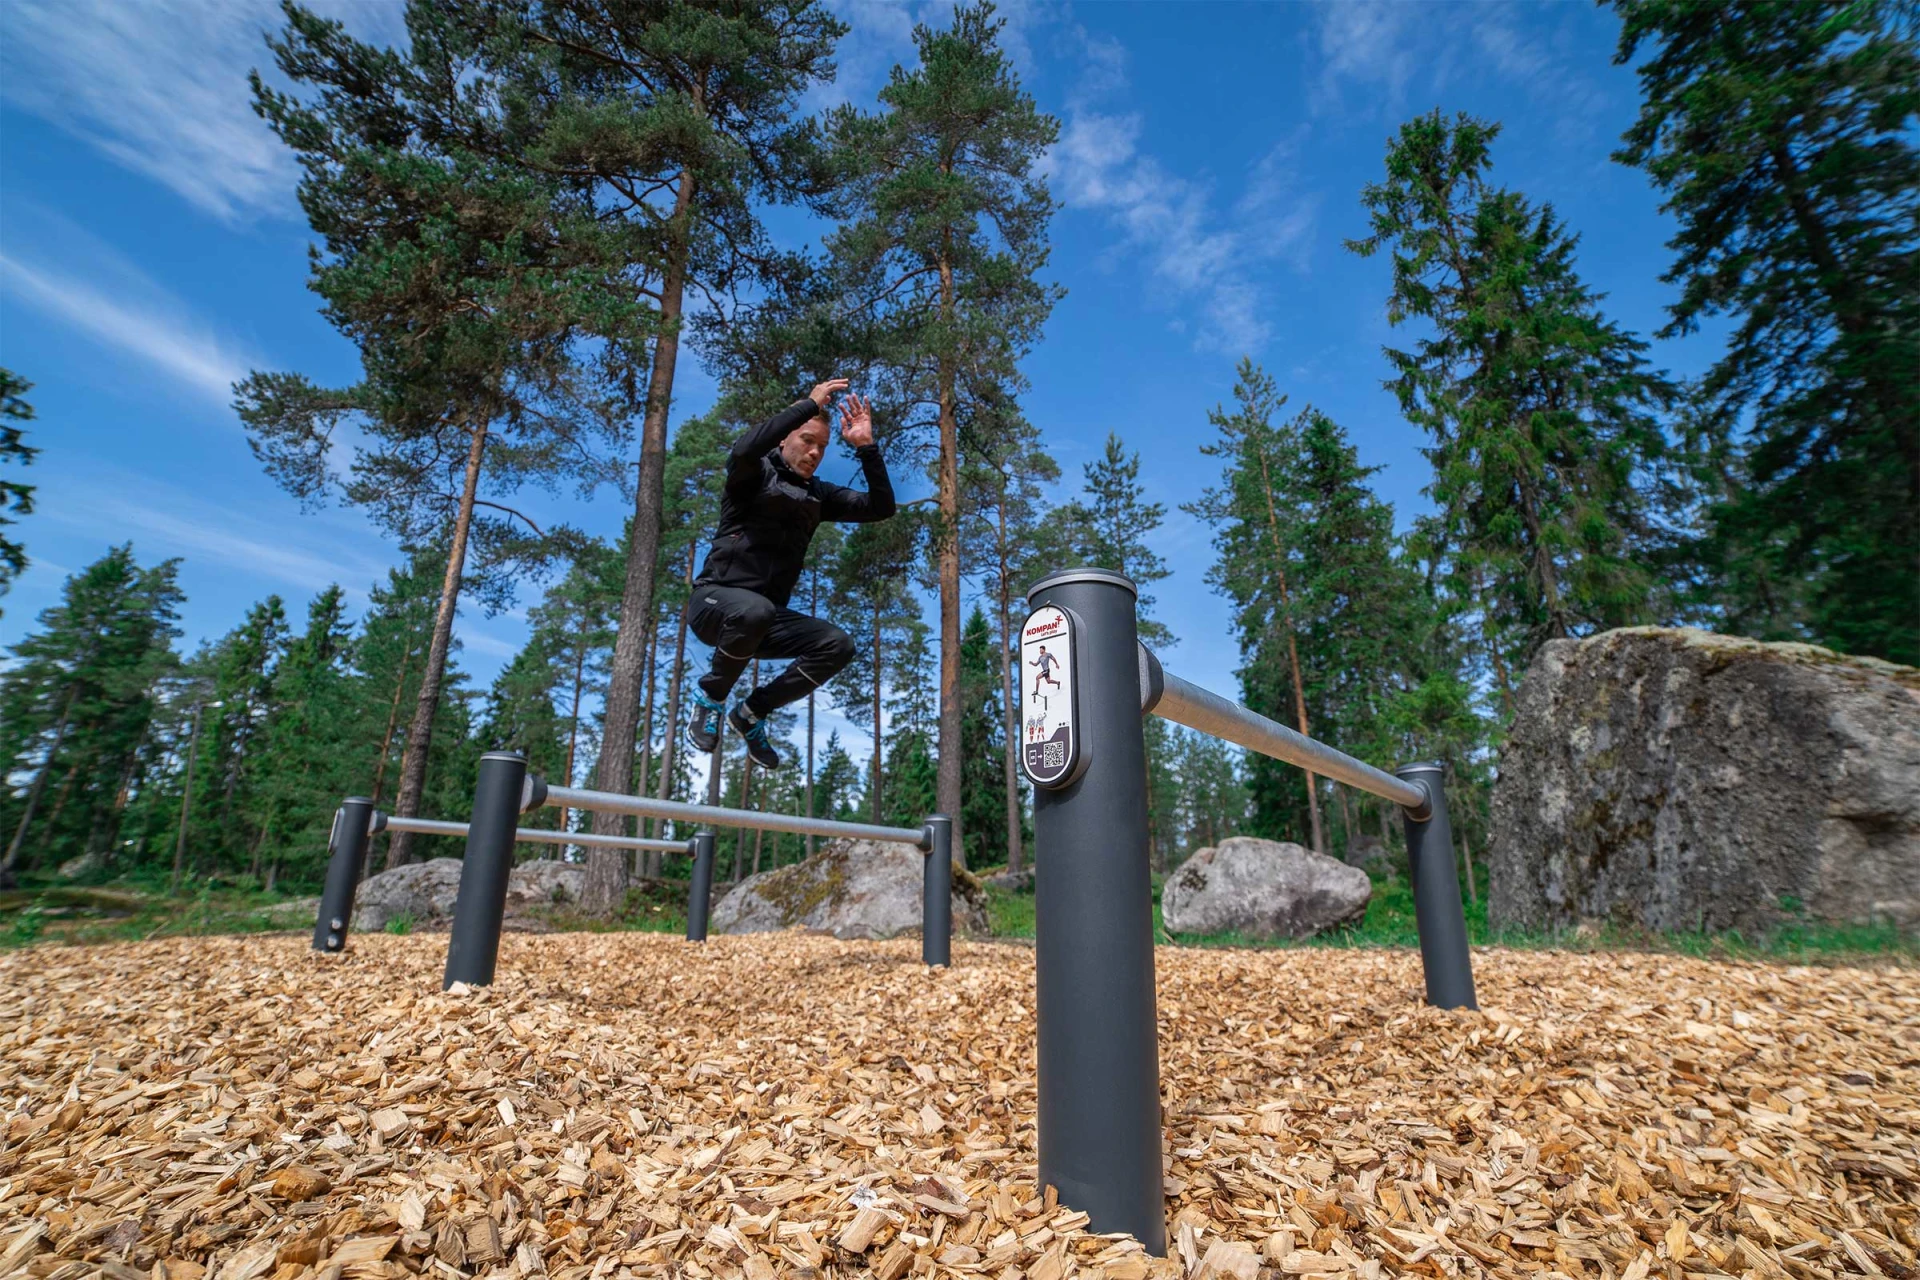 Man jumping over hurdles on an obstacle course in the woods